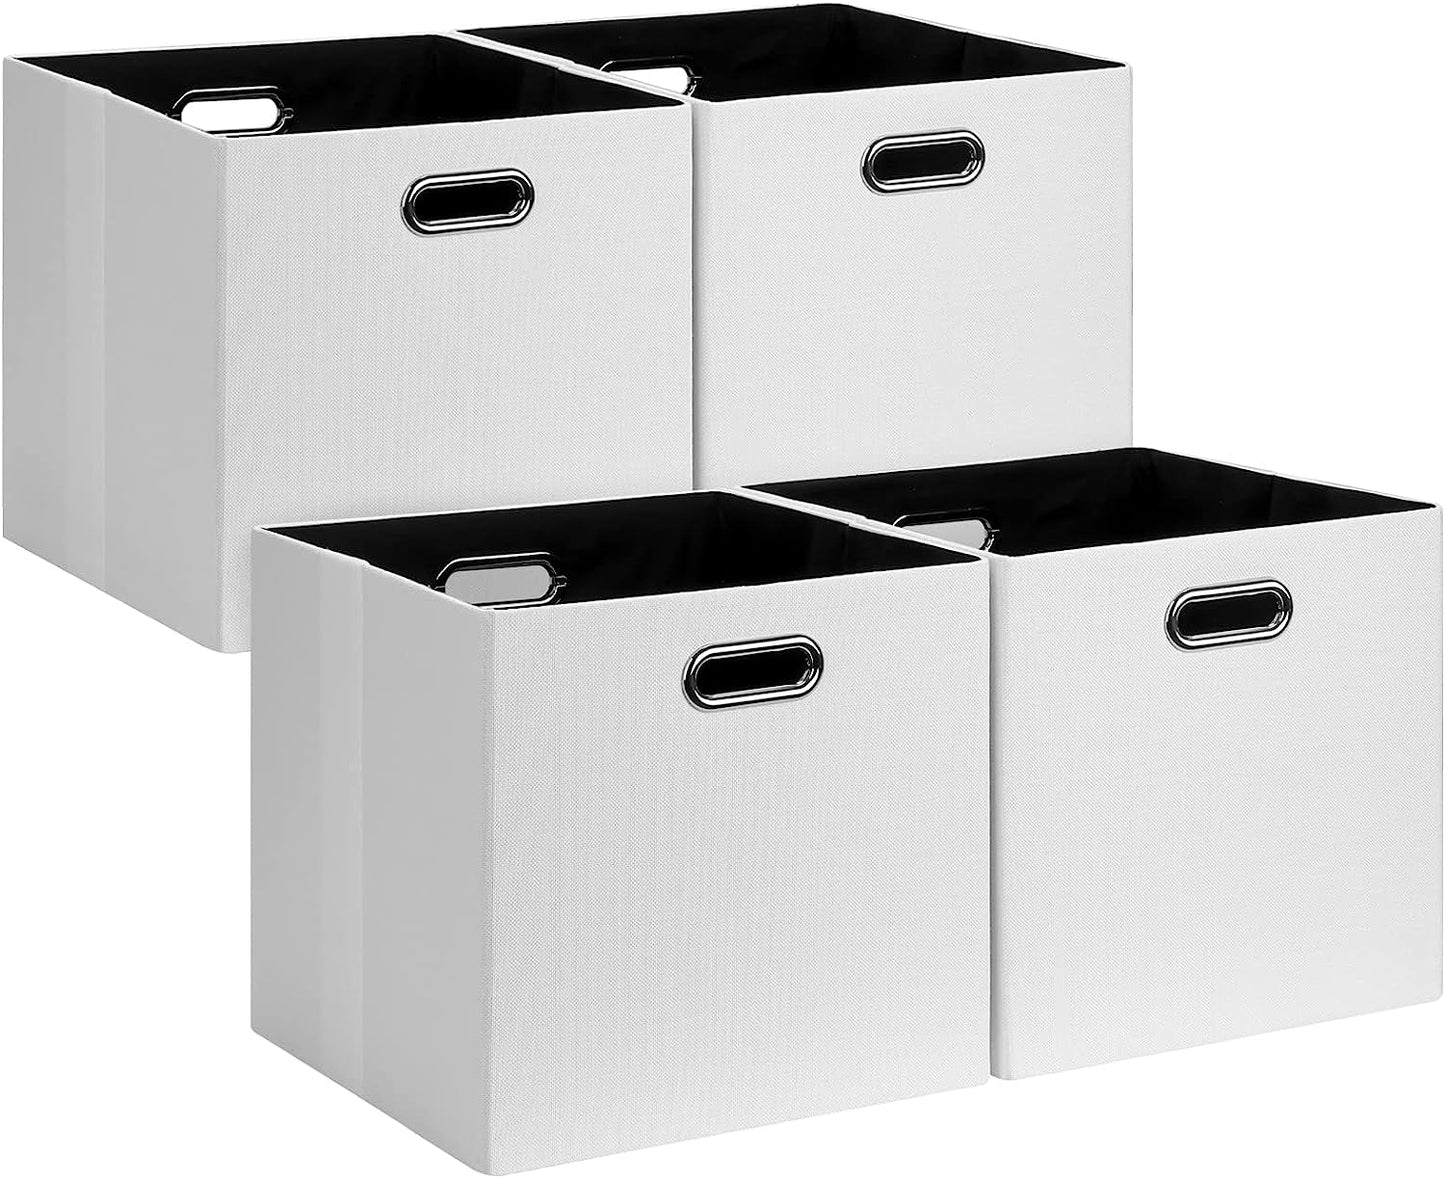 Fabric Storage Cubes, 13x13 Collapsible Storage Bins with Dual